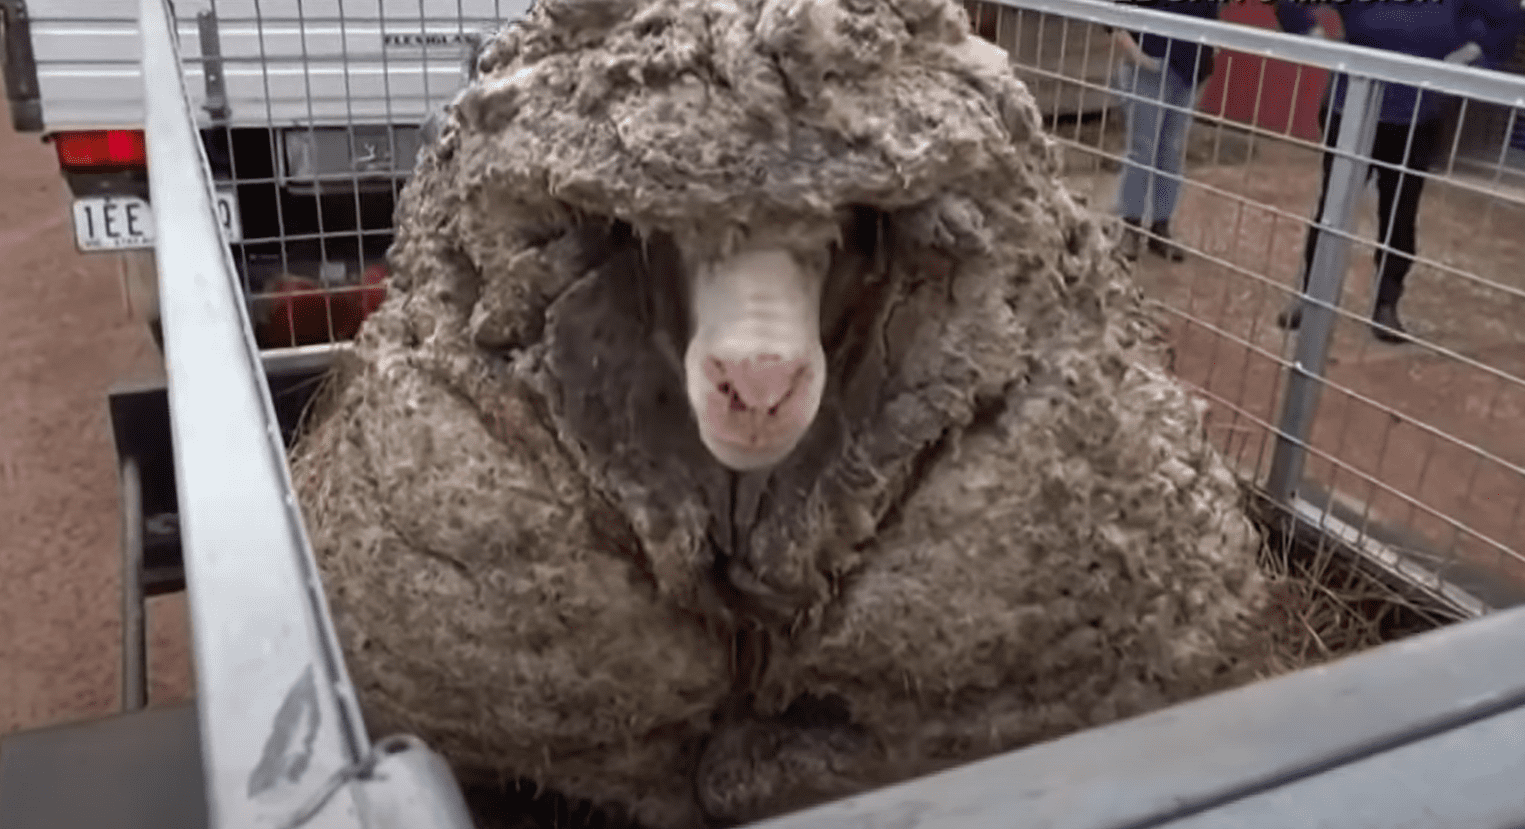 Baarack the sheep is seen before his thick wool was shorn in Lancefield, Victoria, Australia earlier this month. | Photo: YouTube/WPTV News - FL Palm Beaches and Treasure Coast